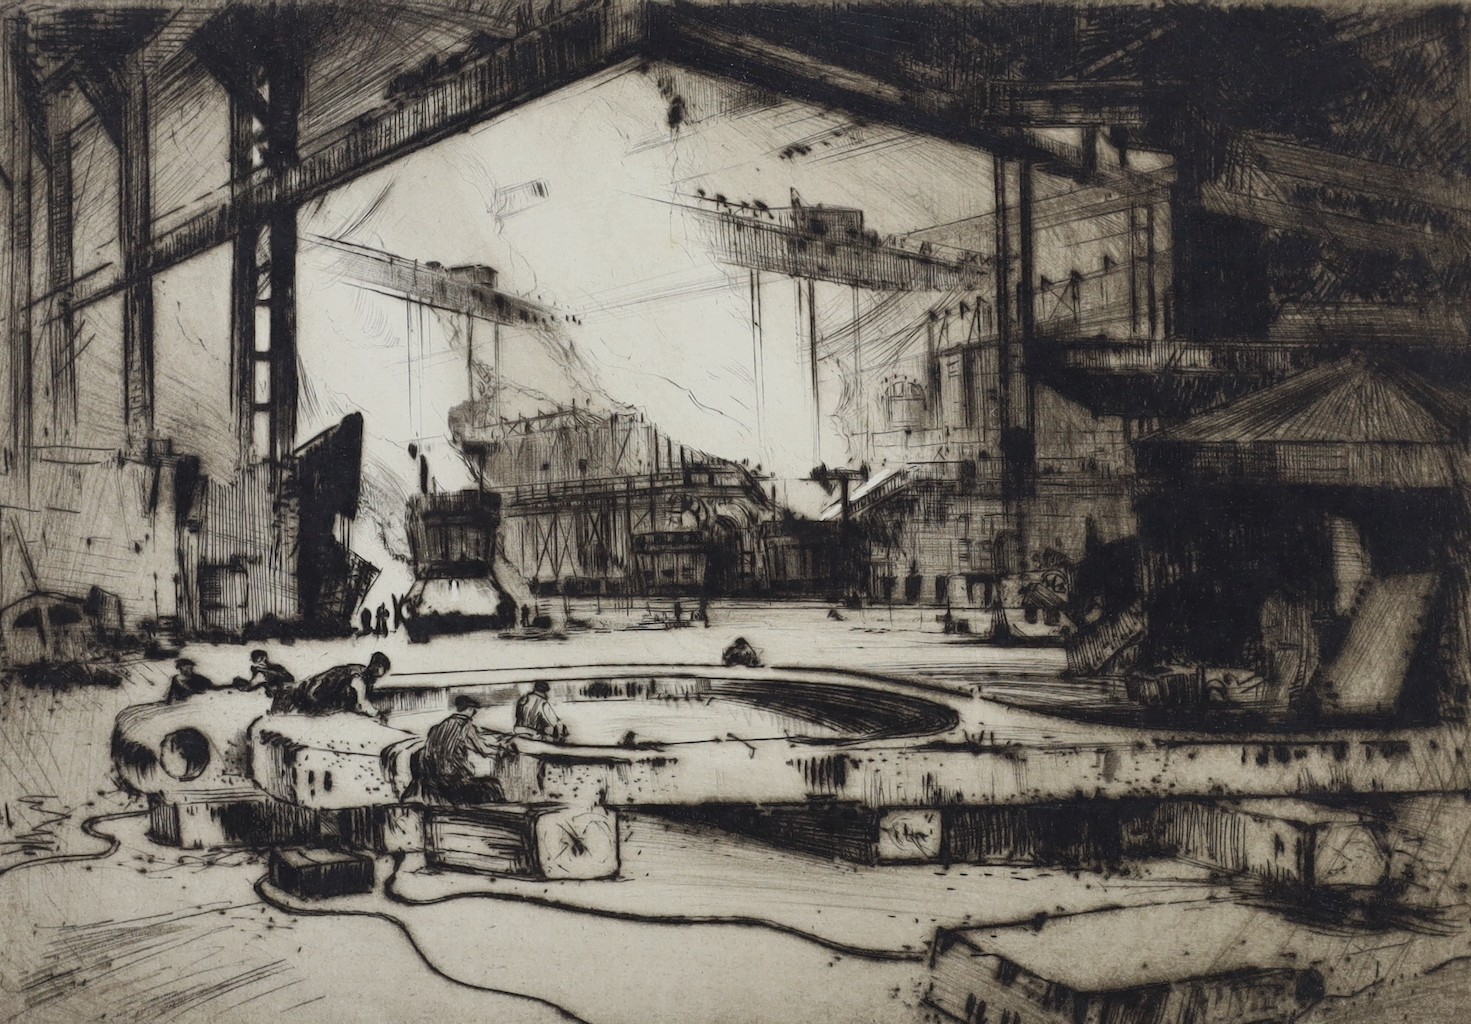 Frank Henry Mason (1876-1965), Impressions of the Works of William Beardmore and Company Ltd, Glasgow, folio of six etchings, all signed in pencil, 25 x 18cm, folio overall 46 x 37cm